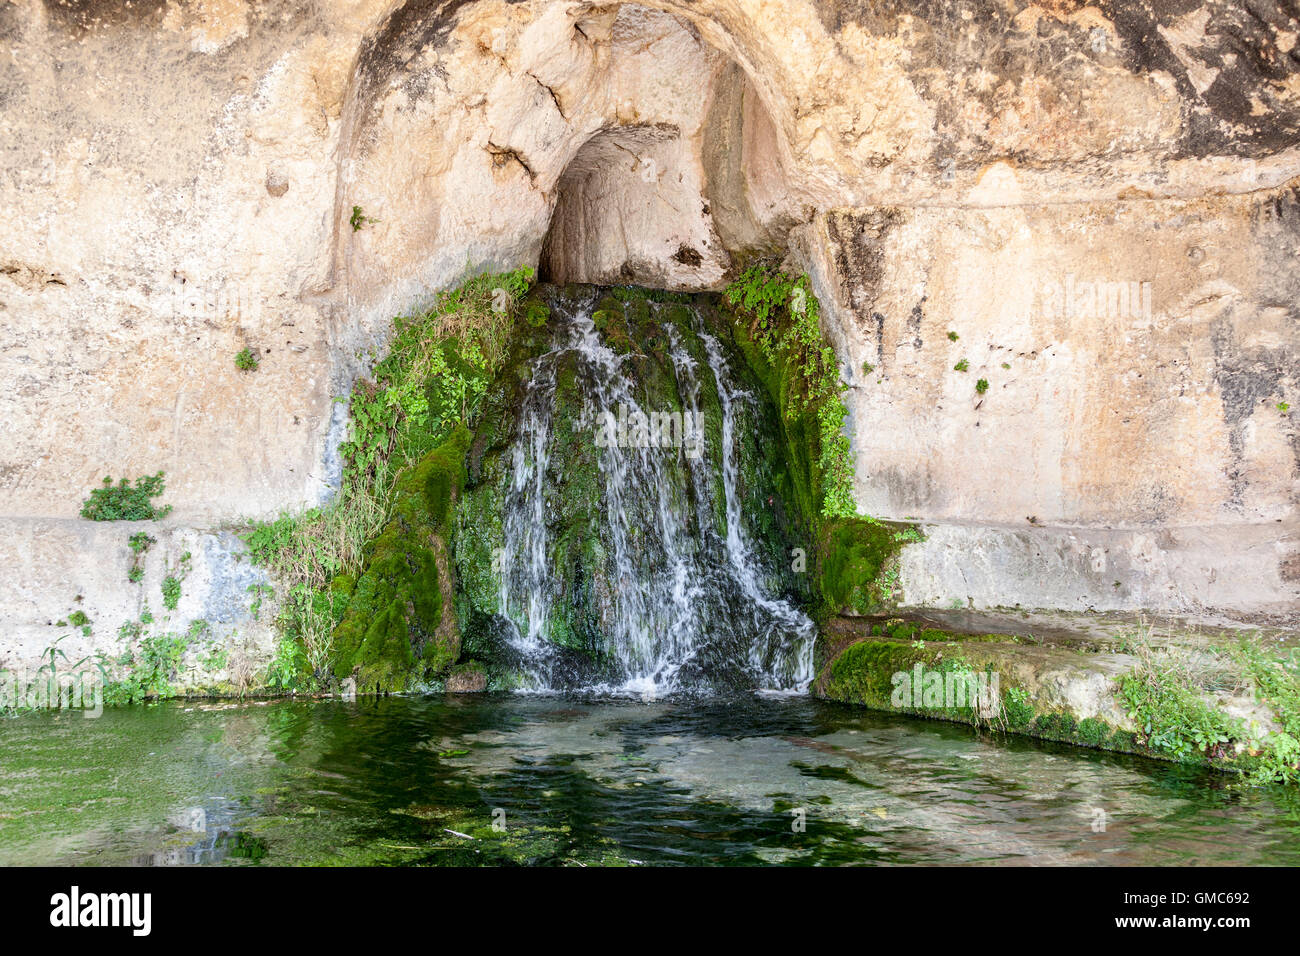 Grotta Del Ninfeo High Resolution Stock Photography and Images - Alamy